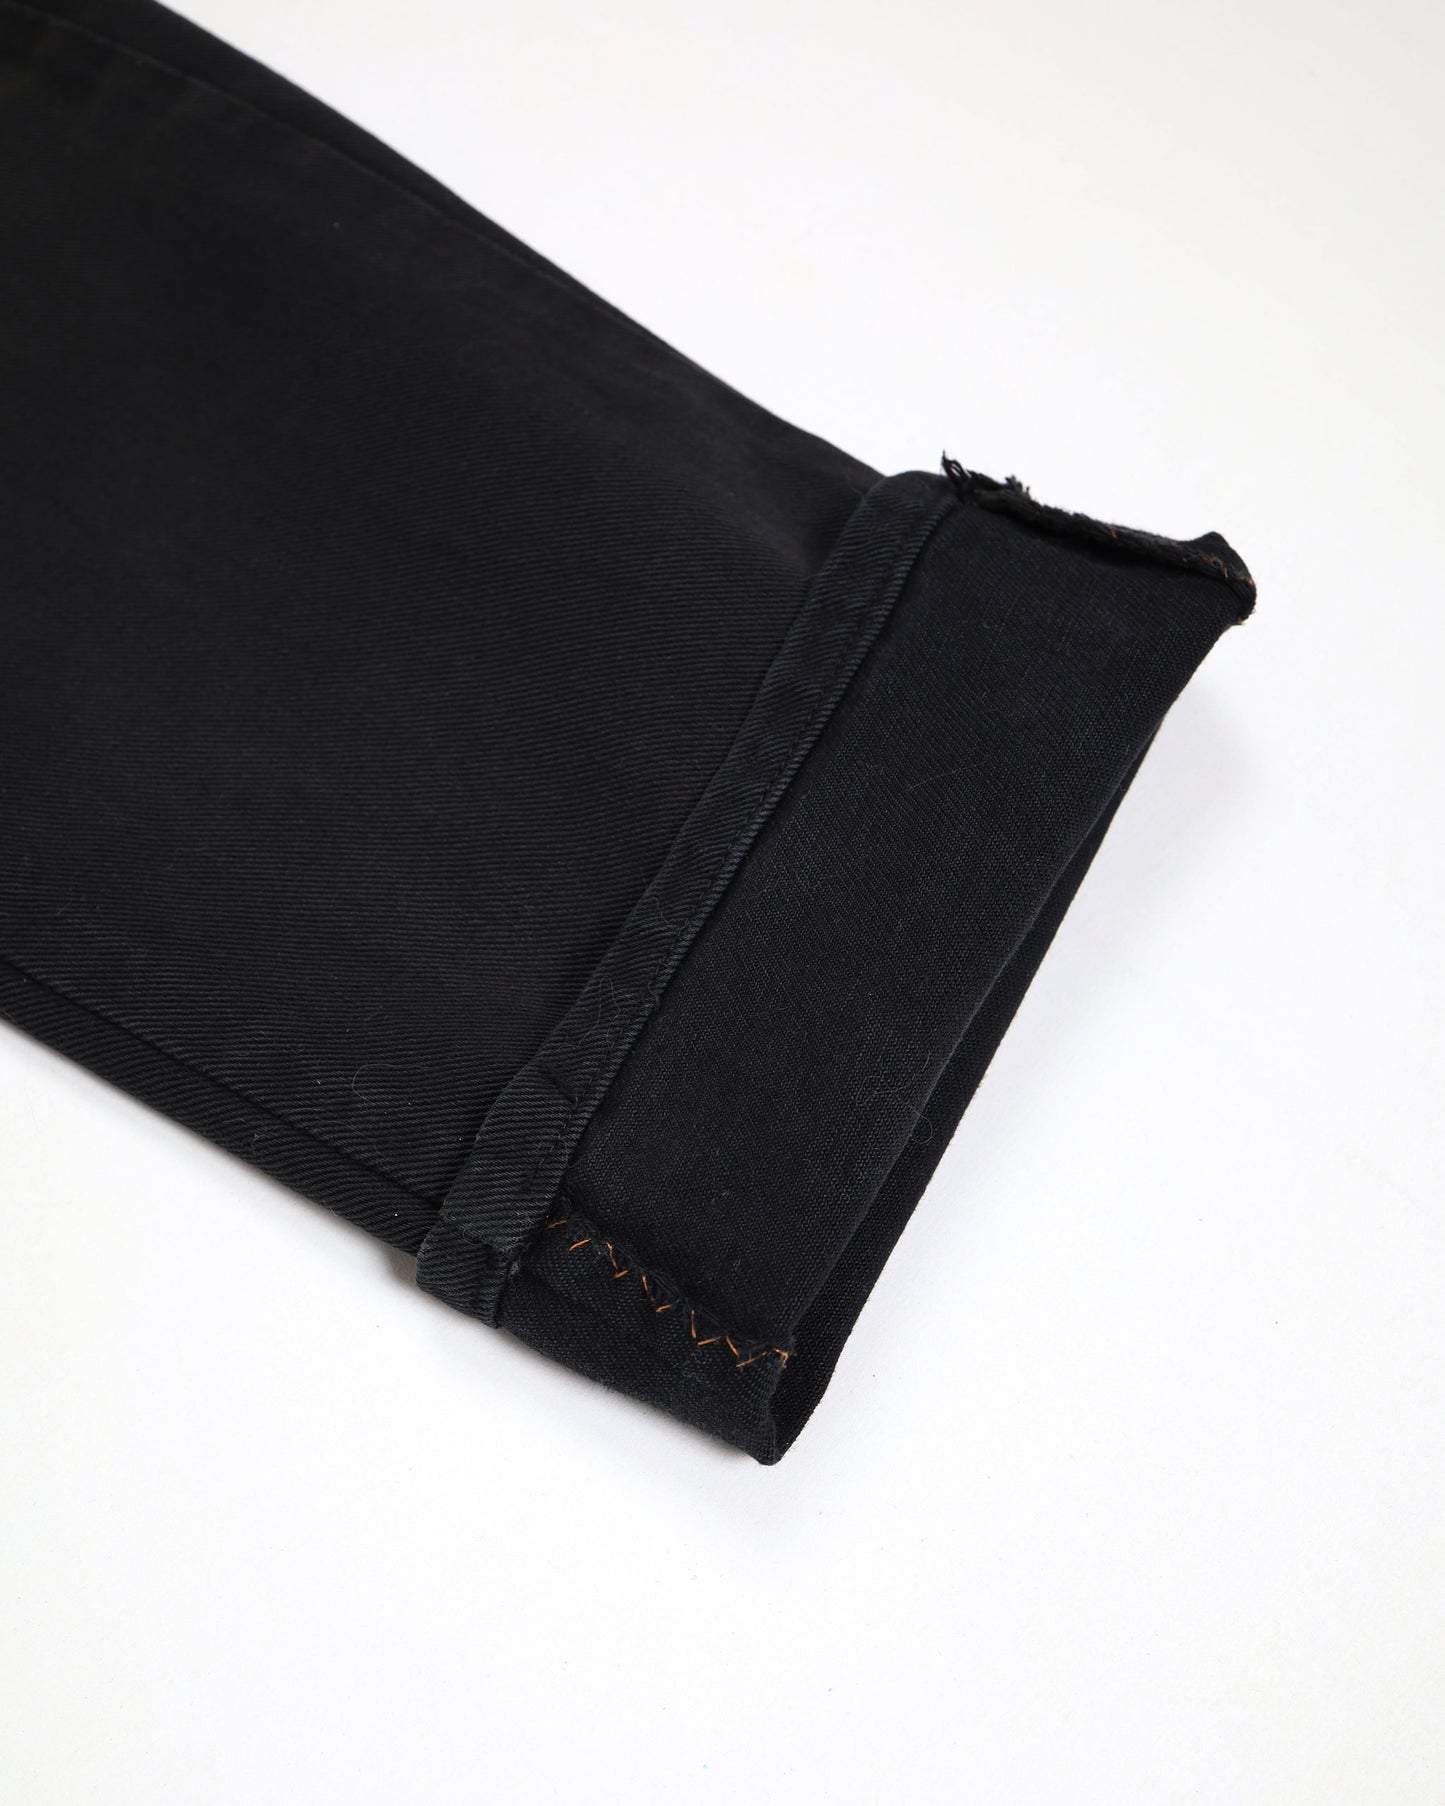 Americanino Reworked Tapered Fit Denim Jeans